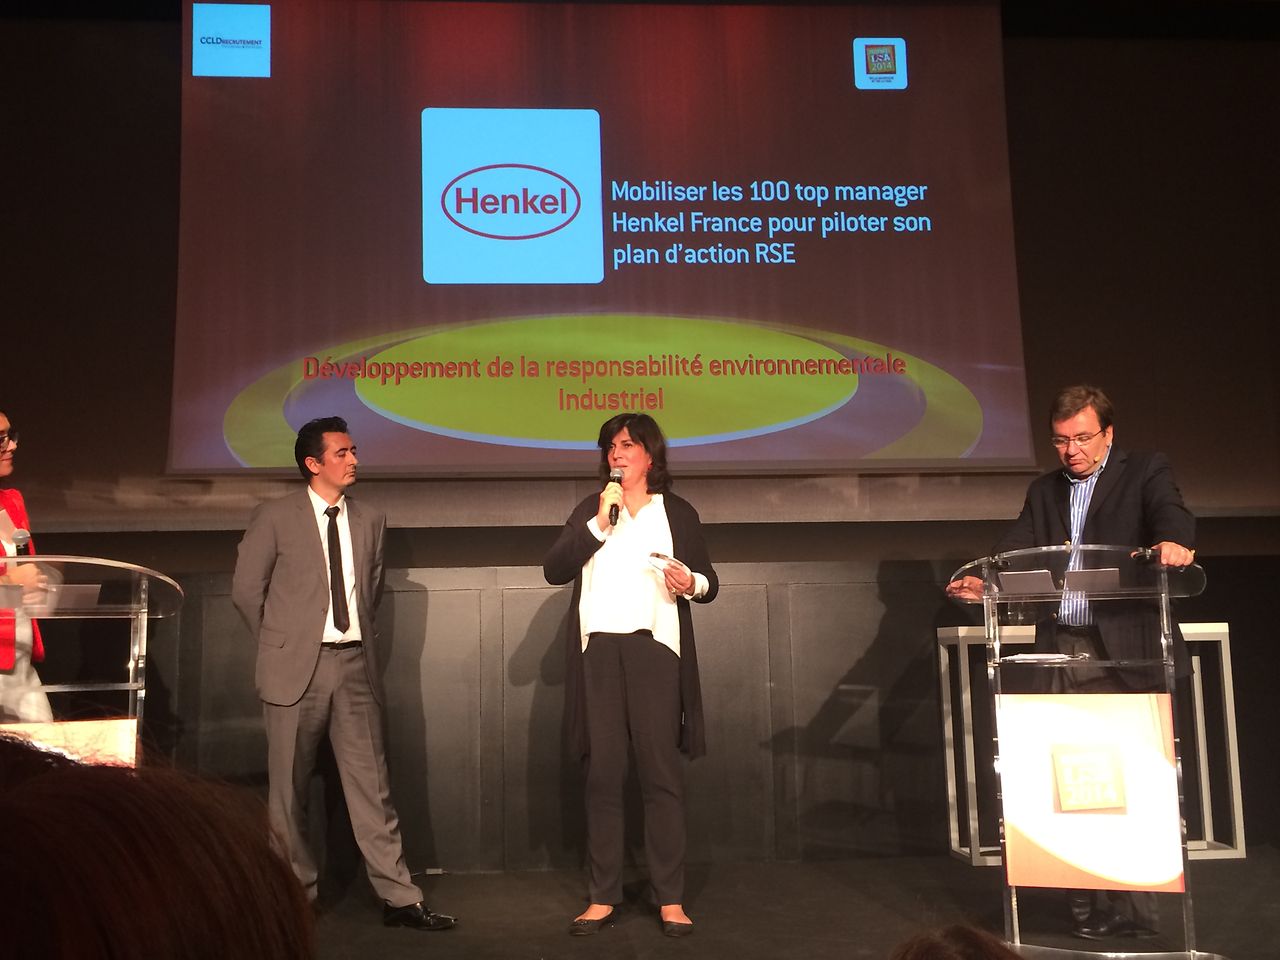 Henkel received the LSA award for managers’ commitment to raising awareness on sustainability.